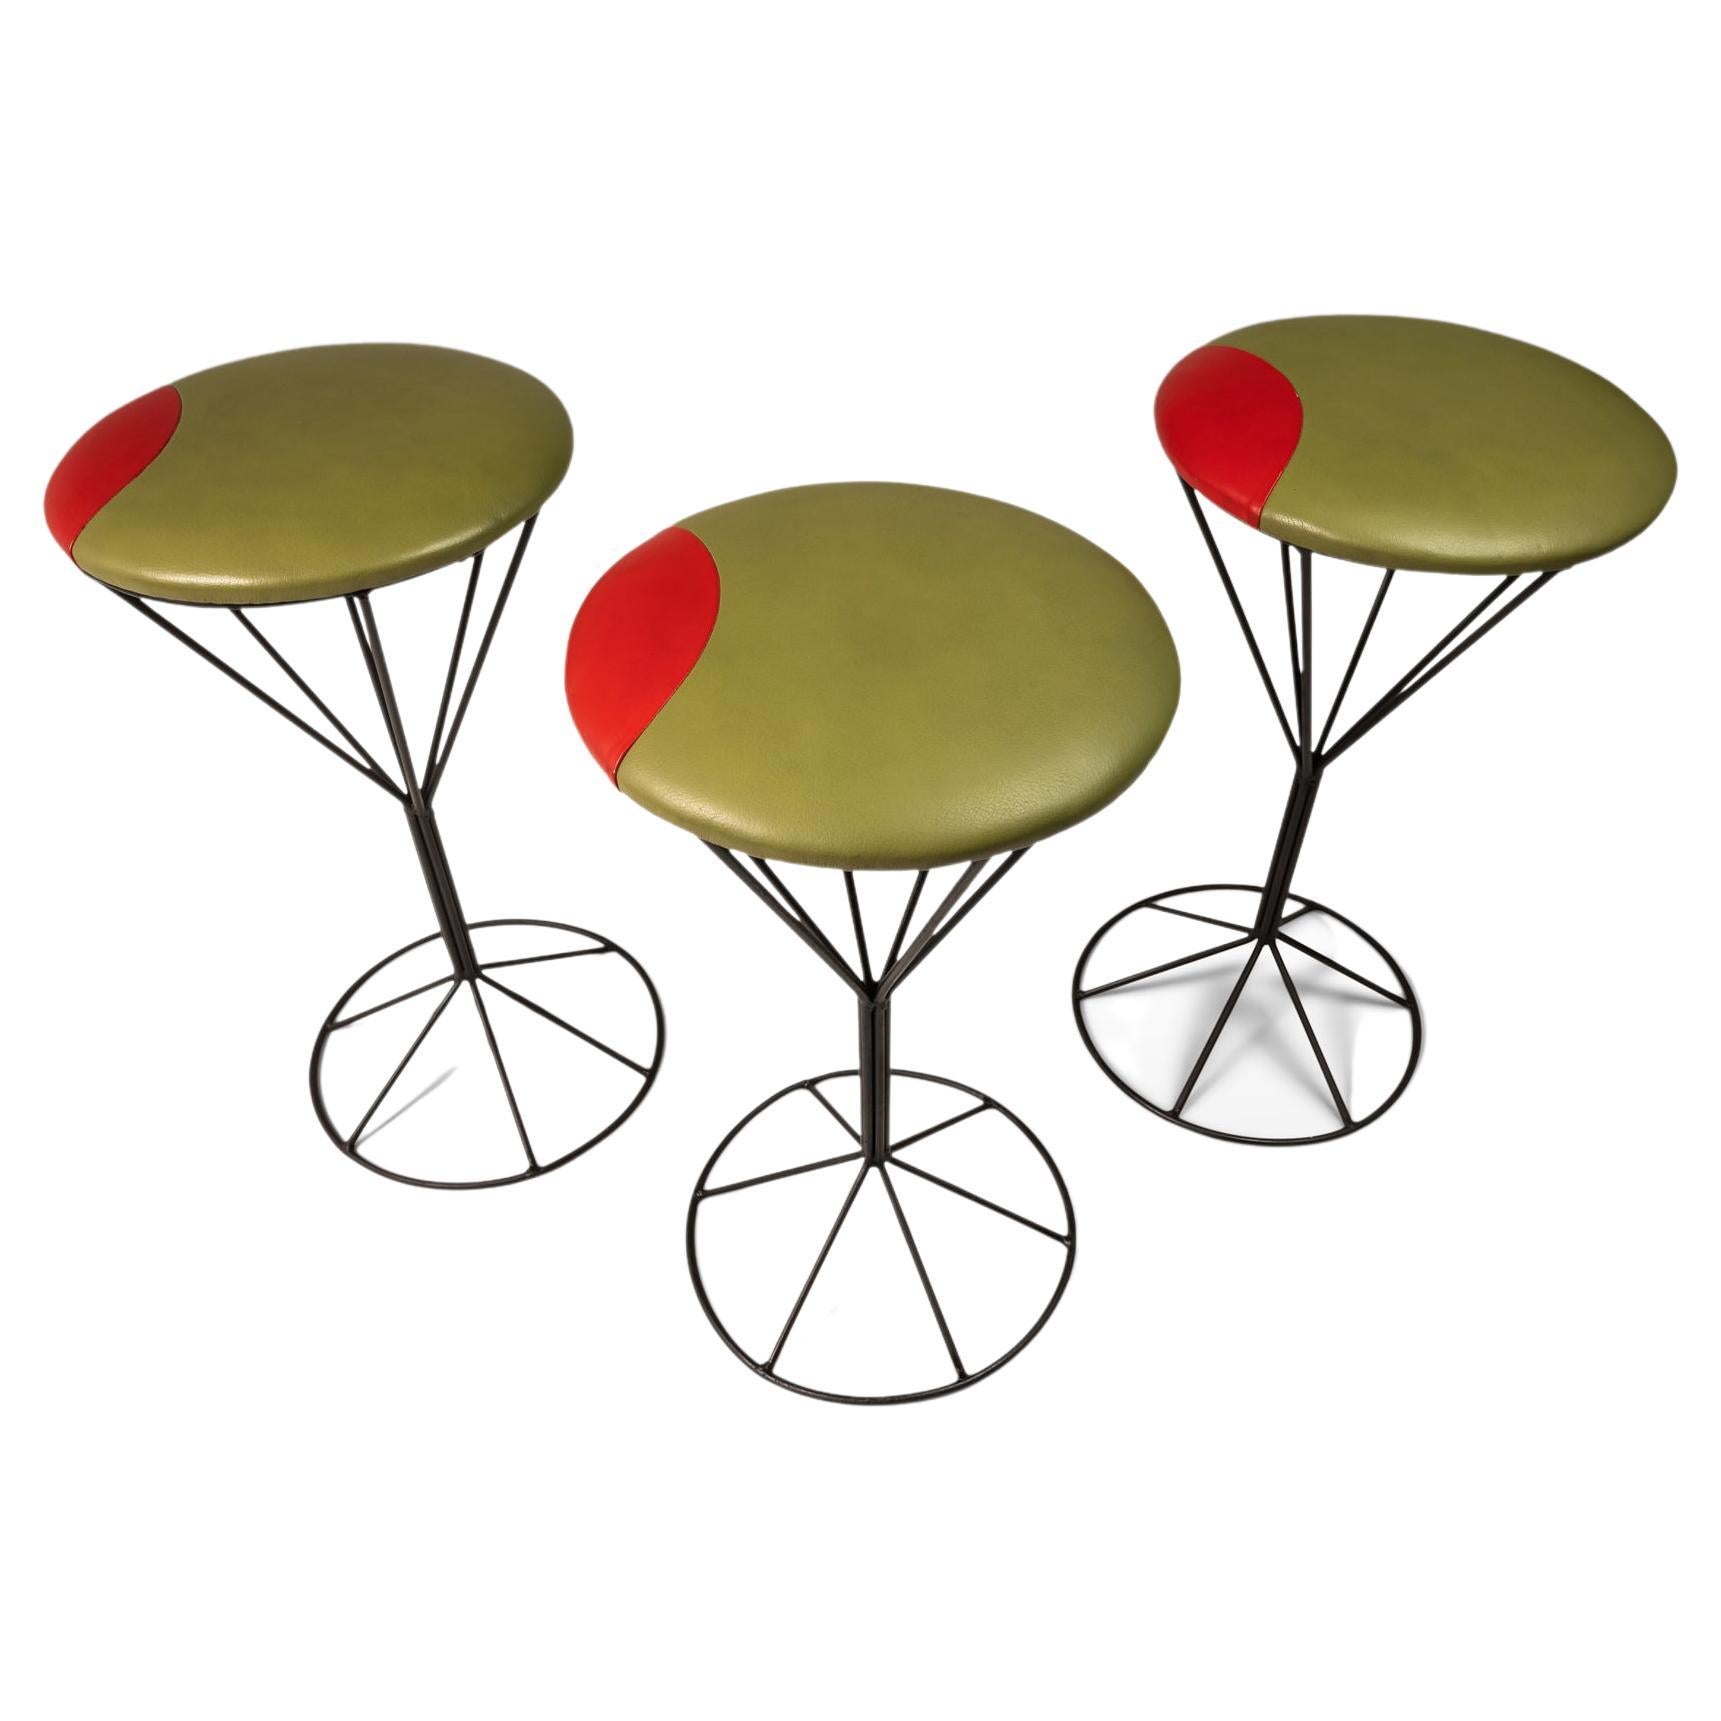 Set of Three ( 3 ) Martini Barstools in Wrought Iron in the Manner of Tony Paul